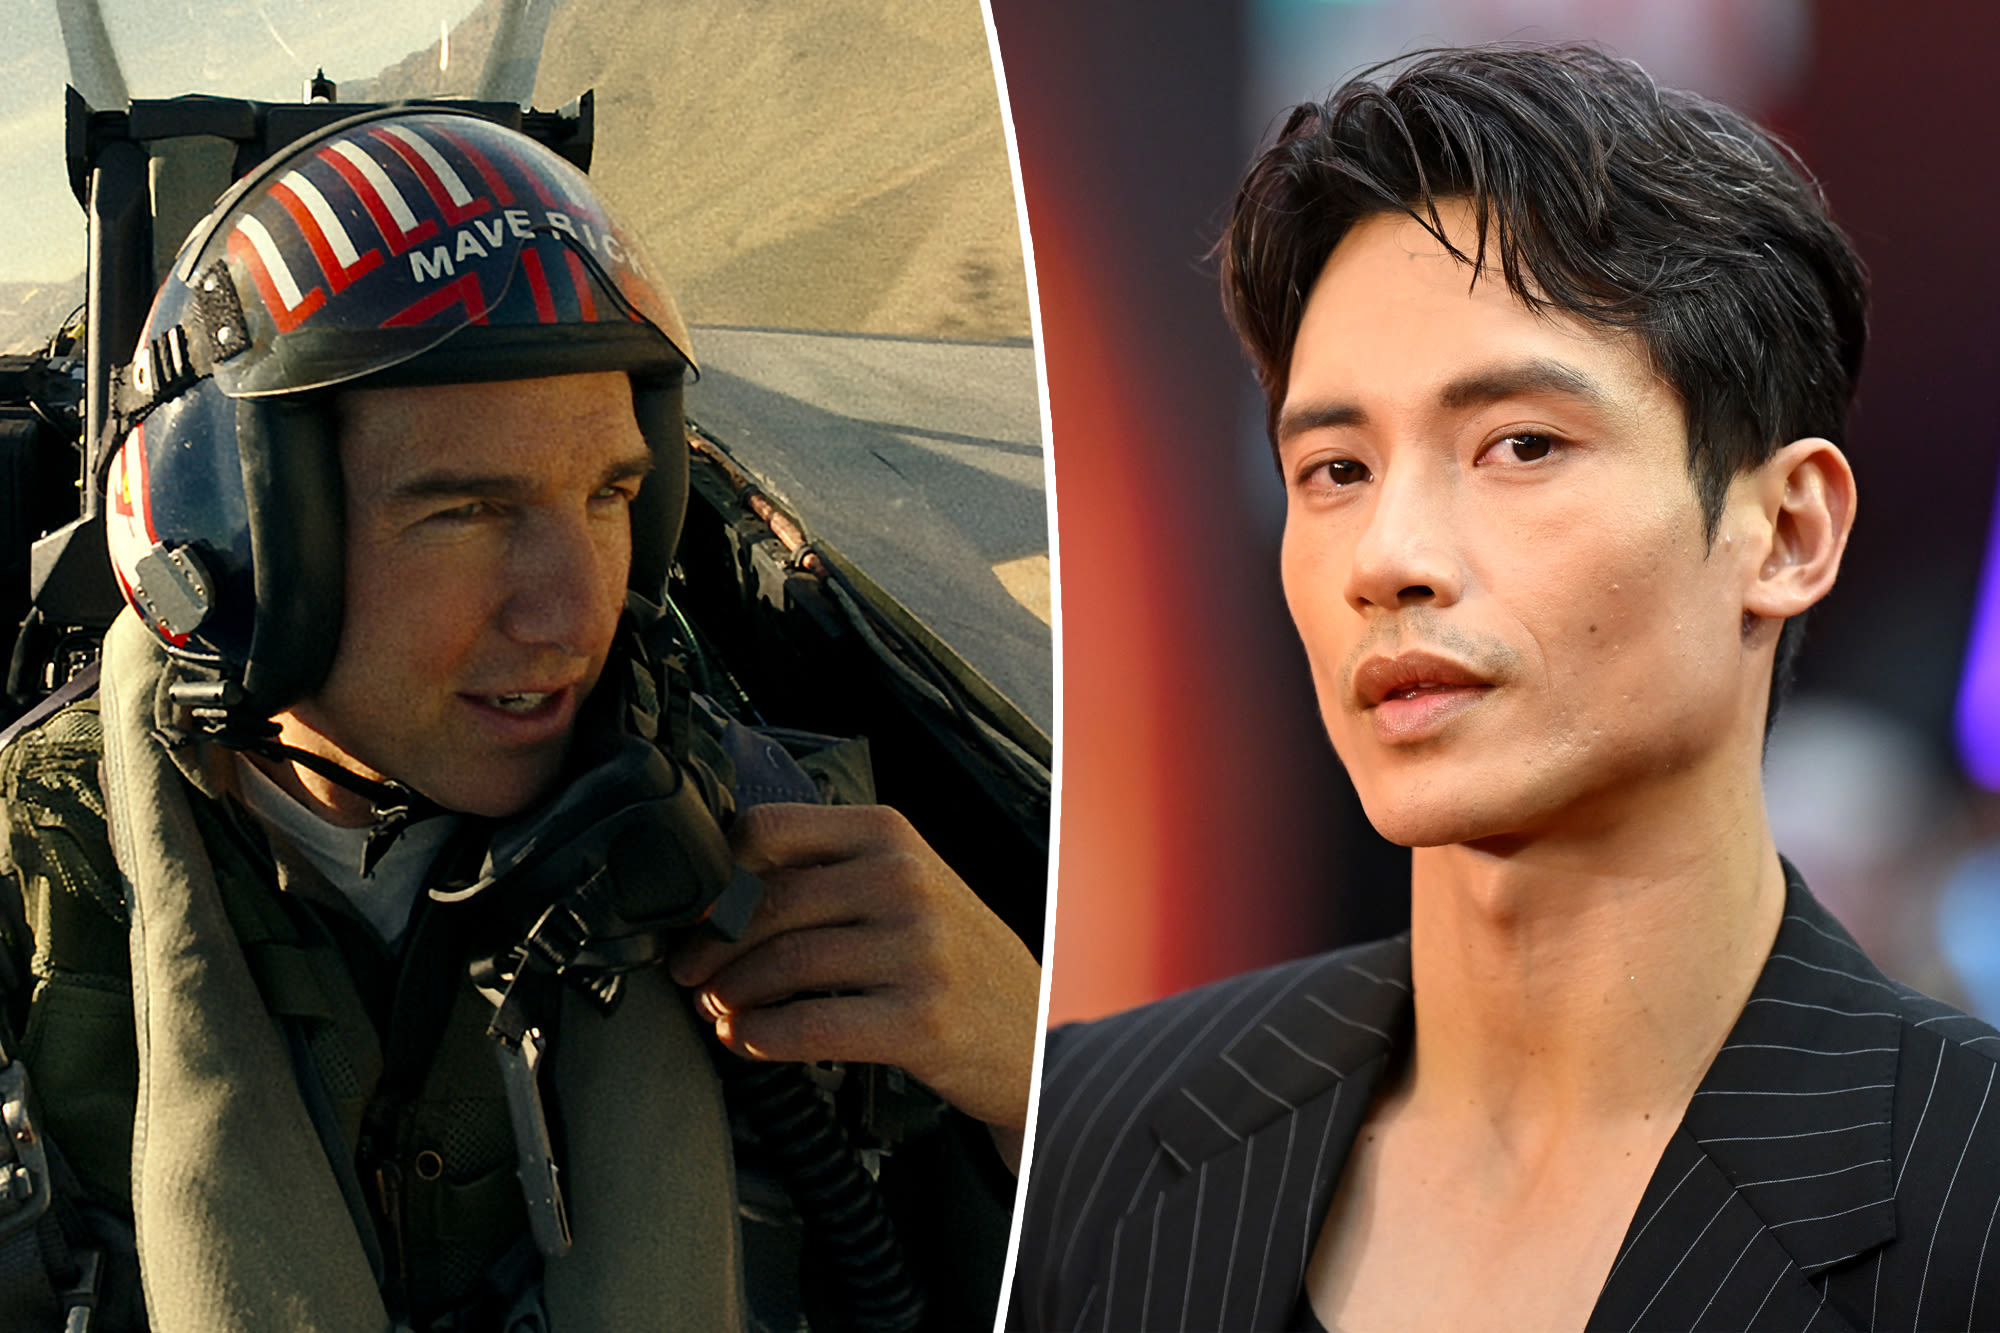 Manny Jacinto reacts to ‘Top Gun: Maverick’ for cutting his lines: ‘Tom Cruise is writing stories for Tom Cruise’